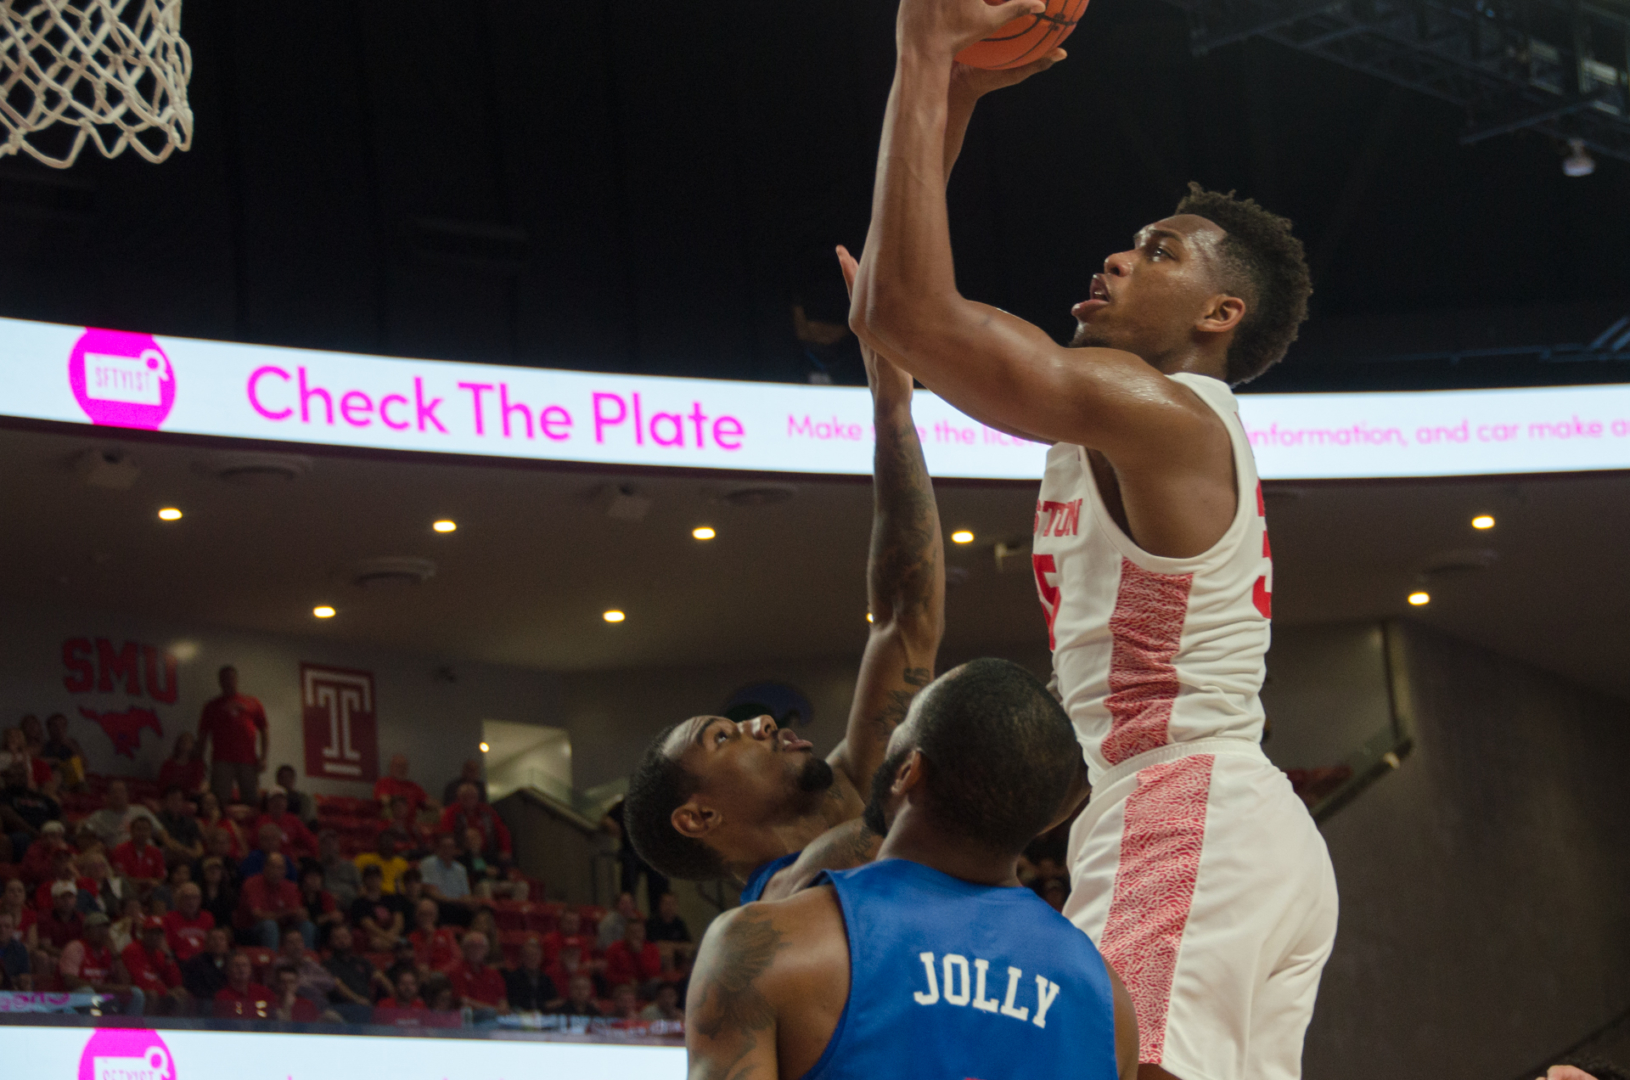 Junior forward Fabian White Jr. scored a quiet 17 points to lead them, also contributing 10 rebounds in the Cougars' Wednesday night win over the SMU Mustangs at Fertitta Center. | Lino Sandil/The Cougar